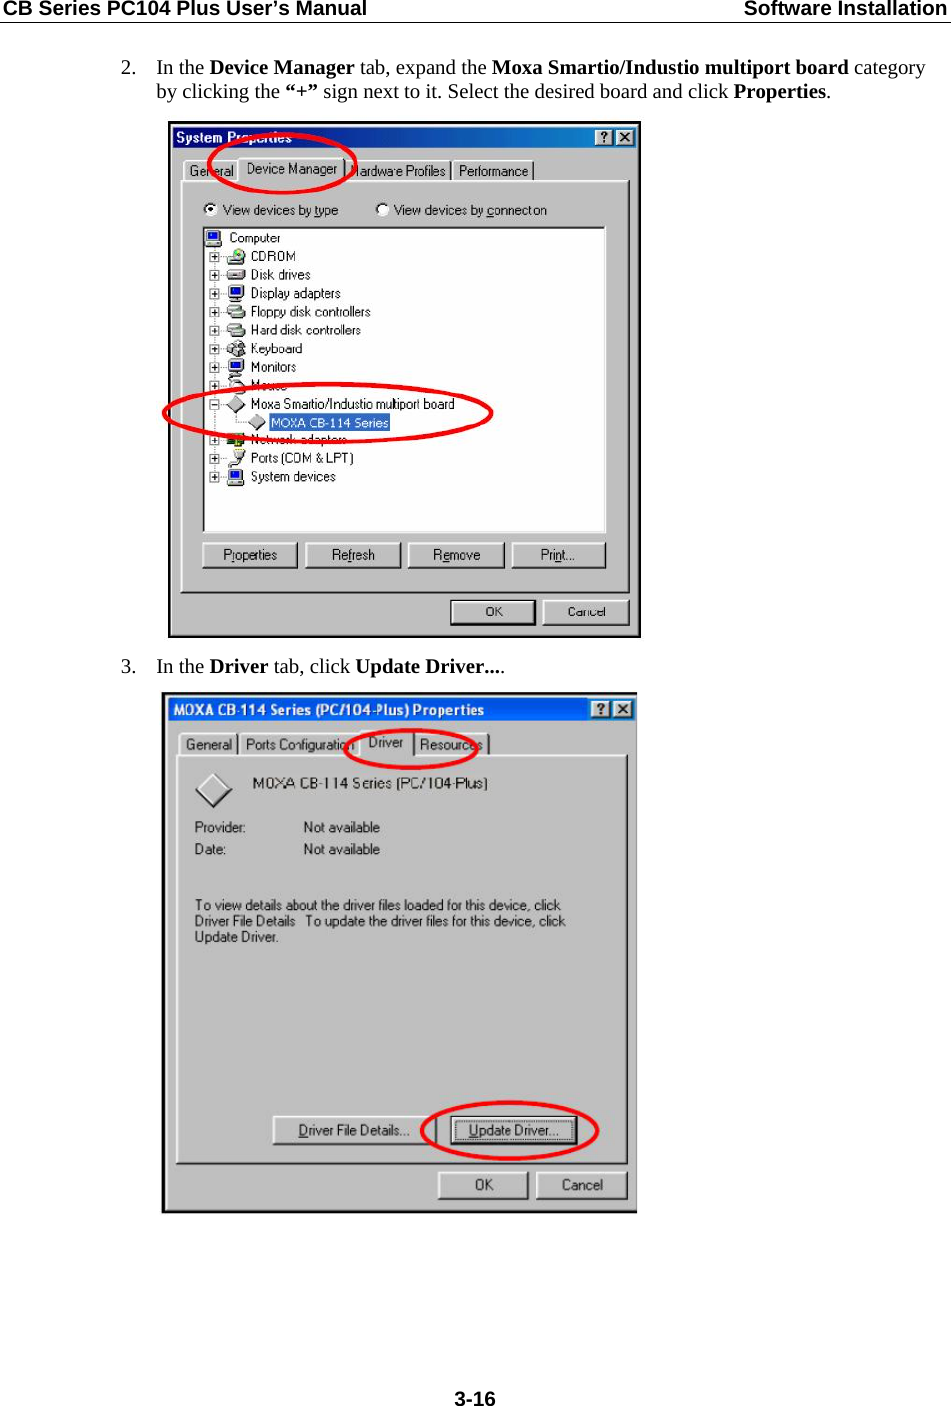 CB Series PC104 Plus User’s Manual  Software Installation 2. In the Device Manager tab, expand the Moxa Smartio/Industio multiport board category by clicking the “+” sign next to it. Select the desired board and click Properties.  3. In the Driver tab, click Update Driver....   3-16